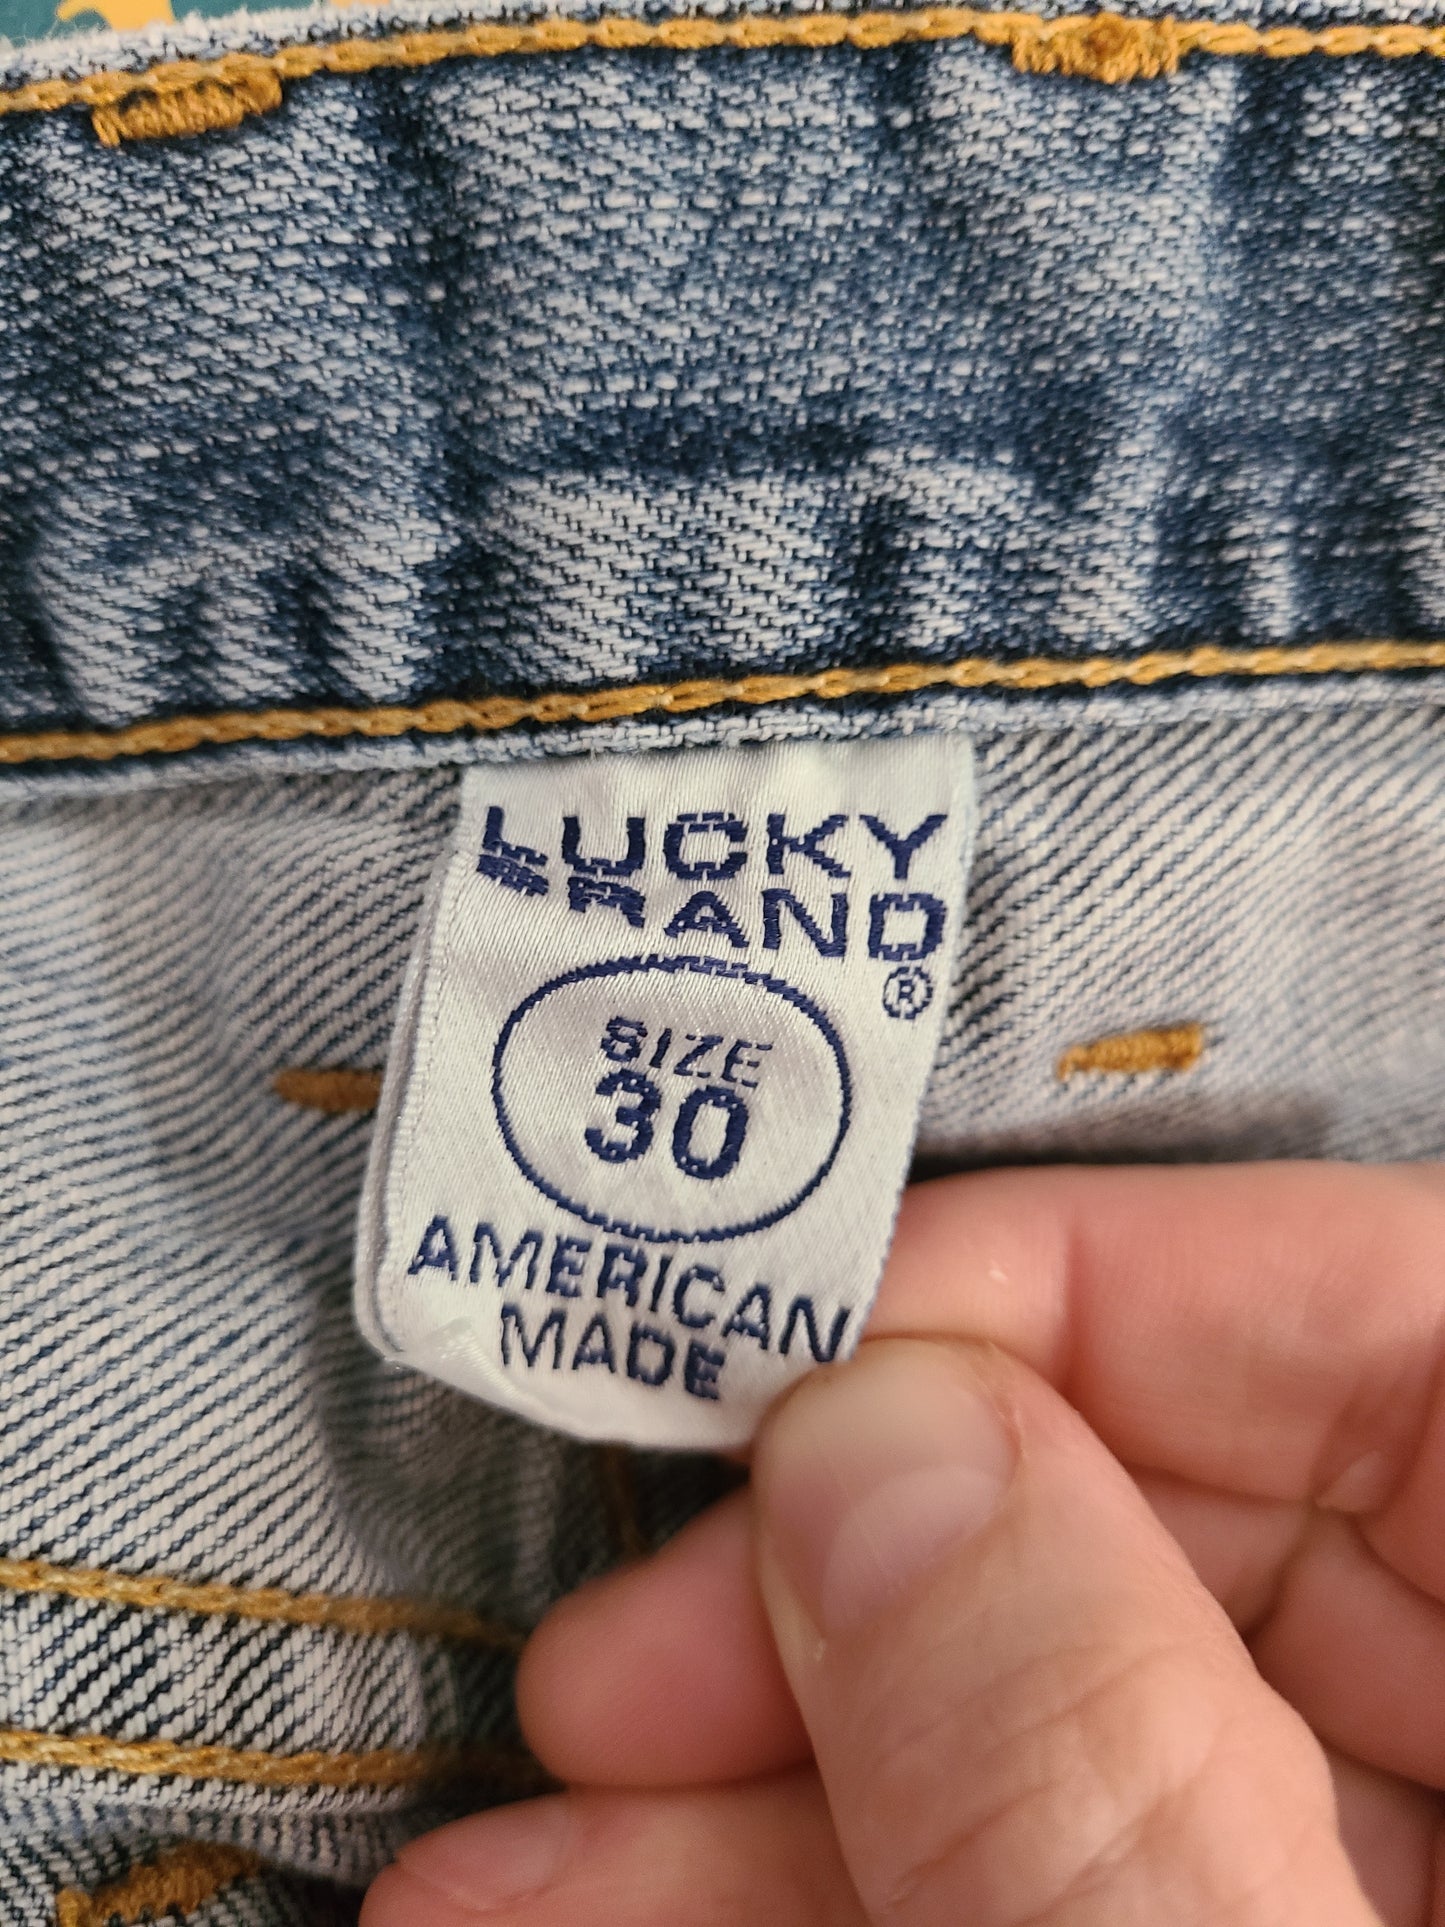 The Thrashed Lowrider Y2K American Made Lucky Brand Dungarees 30